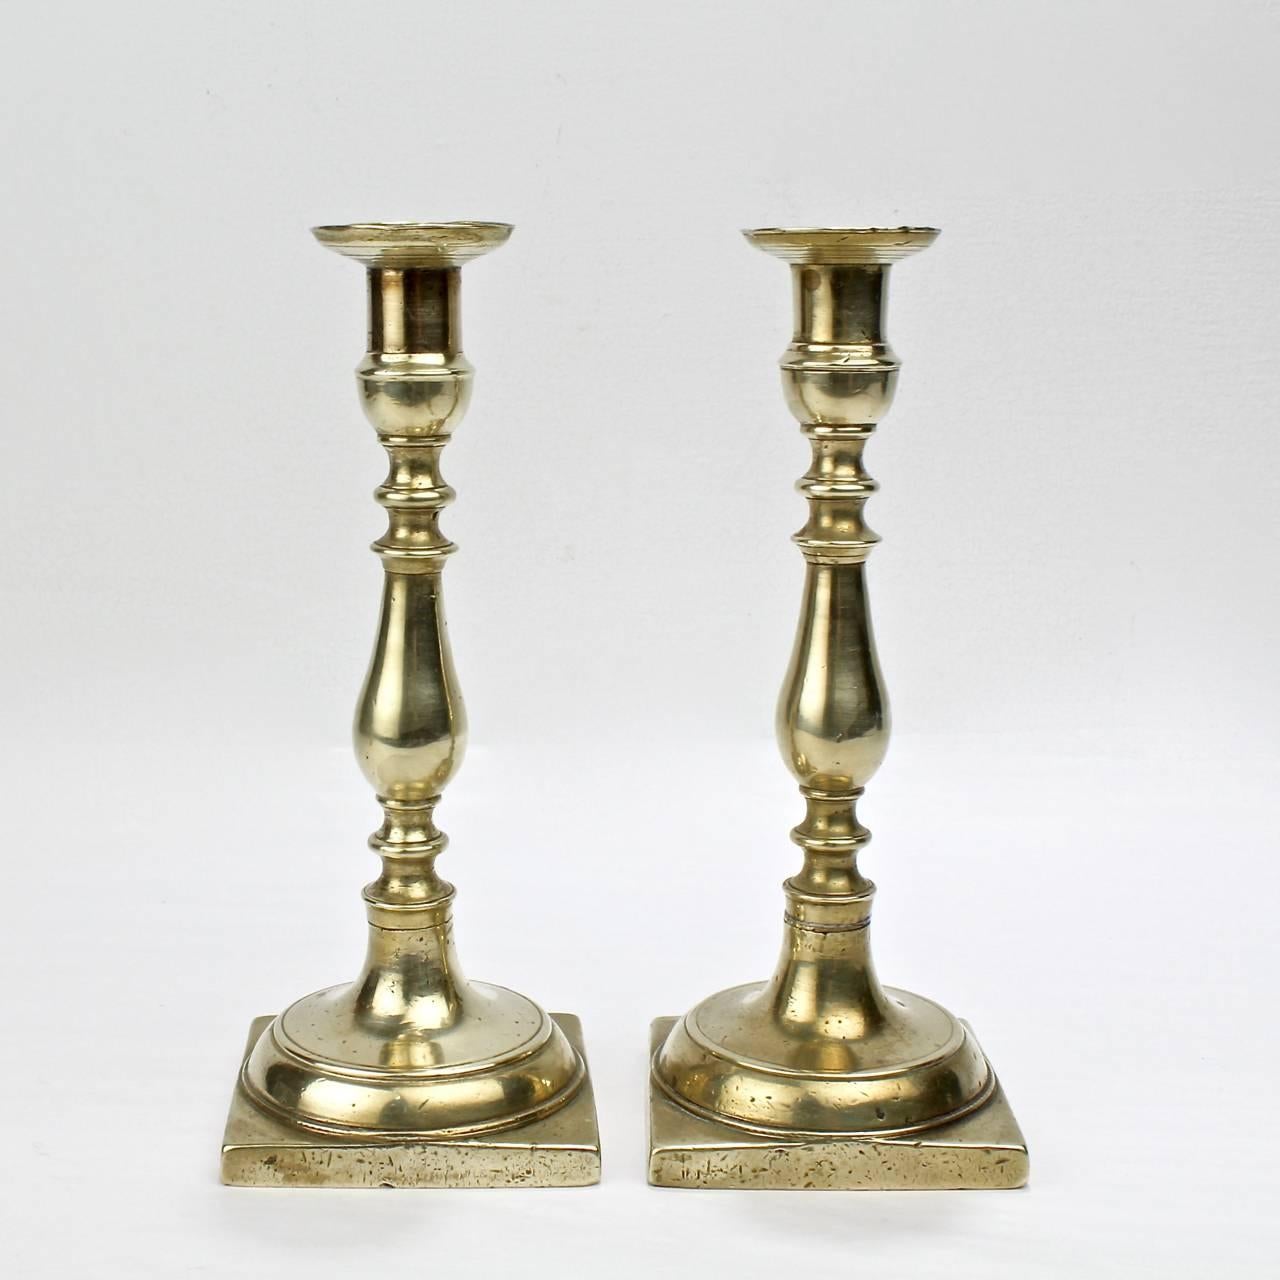 A Fine and very solid pair of early 19th century brass Continental candlesticks.

Likely Northern European (or possibly Russian) in origin.

With candle cups on turned supports and square bases. Each is quite heavy.

Measures: Height: ca. 8